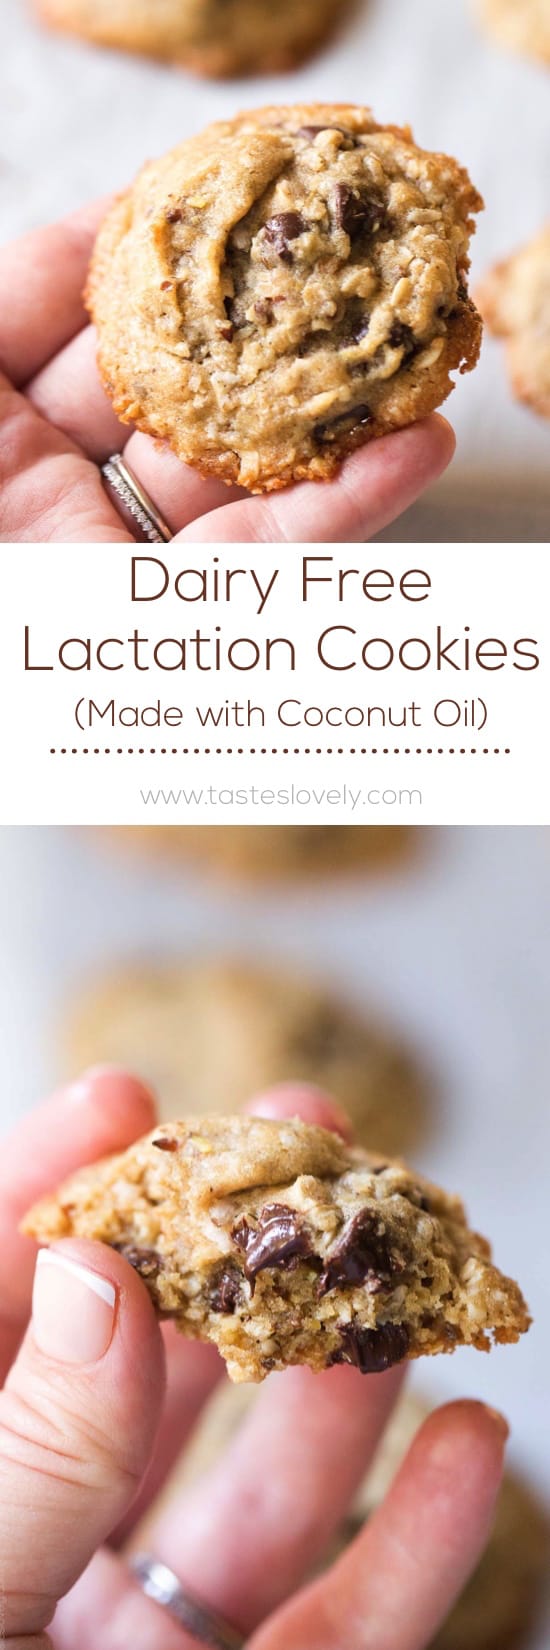 Dairy Free Lactation Cookies made with Coconut Oil. Delicious, and increases your milk supply when breastfeeding!